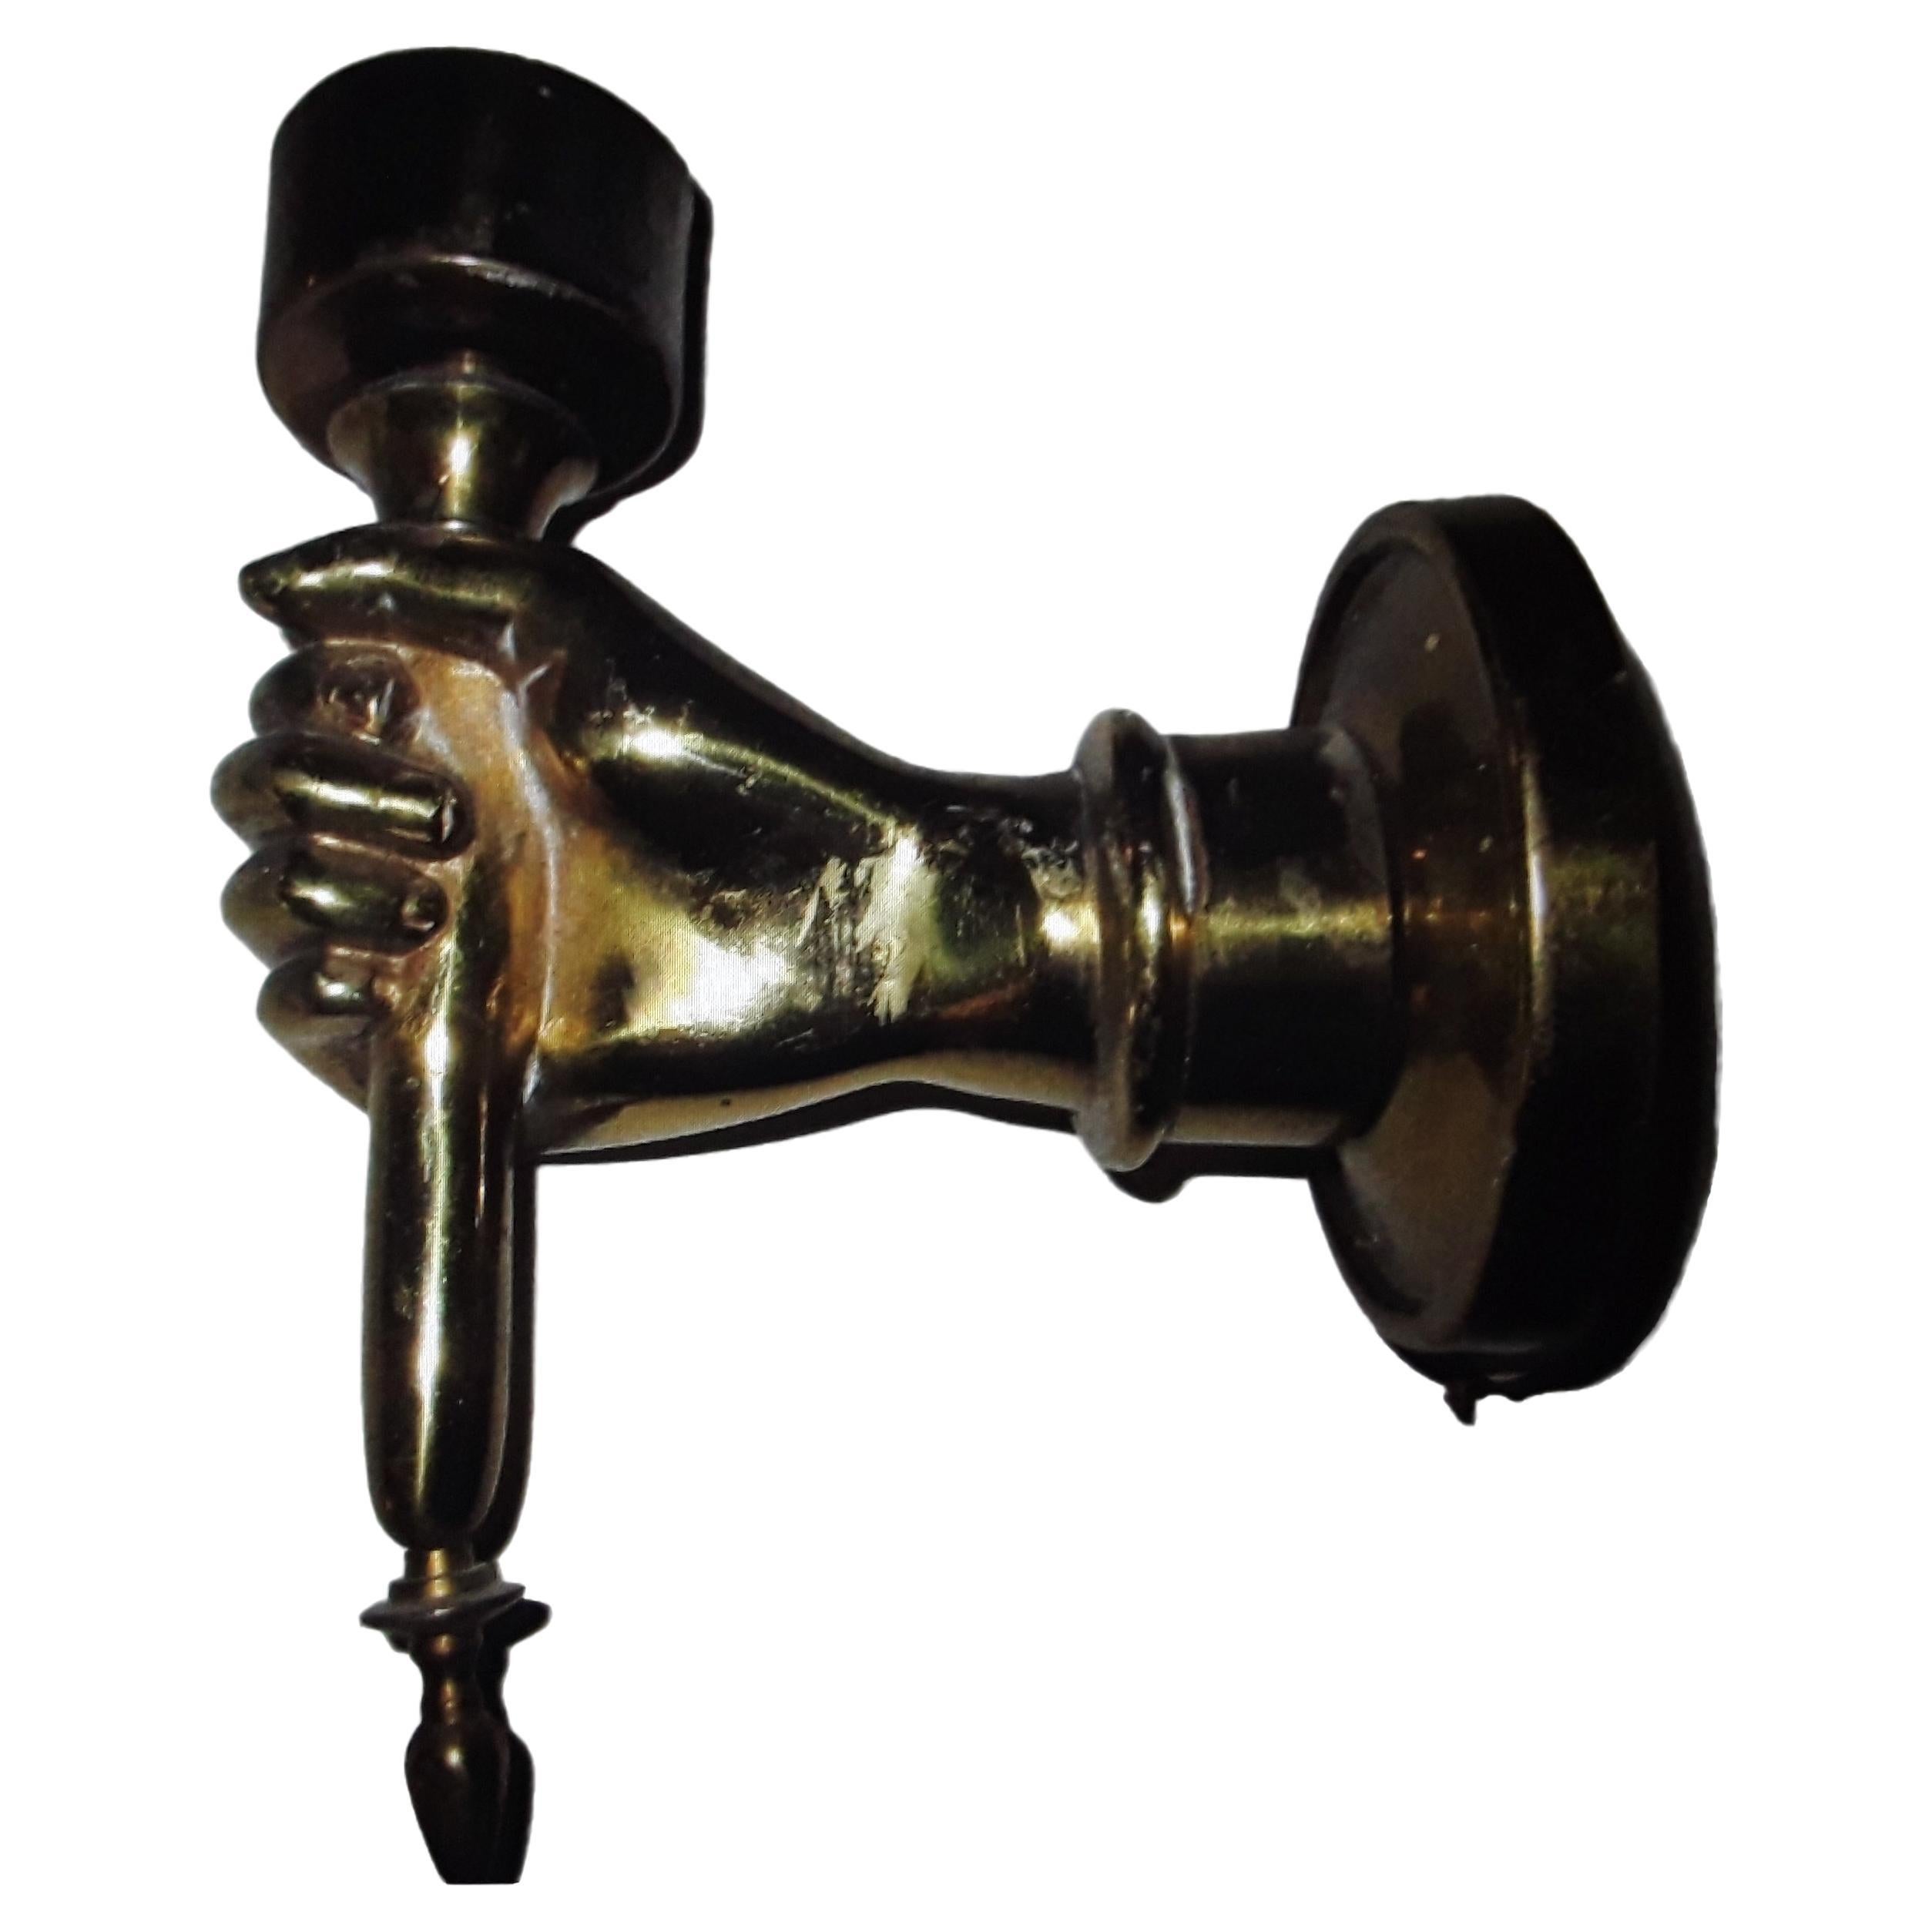 c1930's French Art Deco Gilt Bronze Hand/ Fist Torch Wall Sconce For Sale